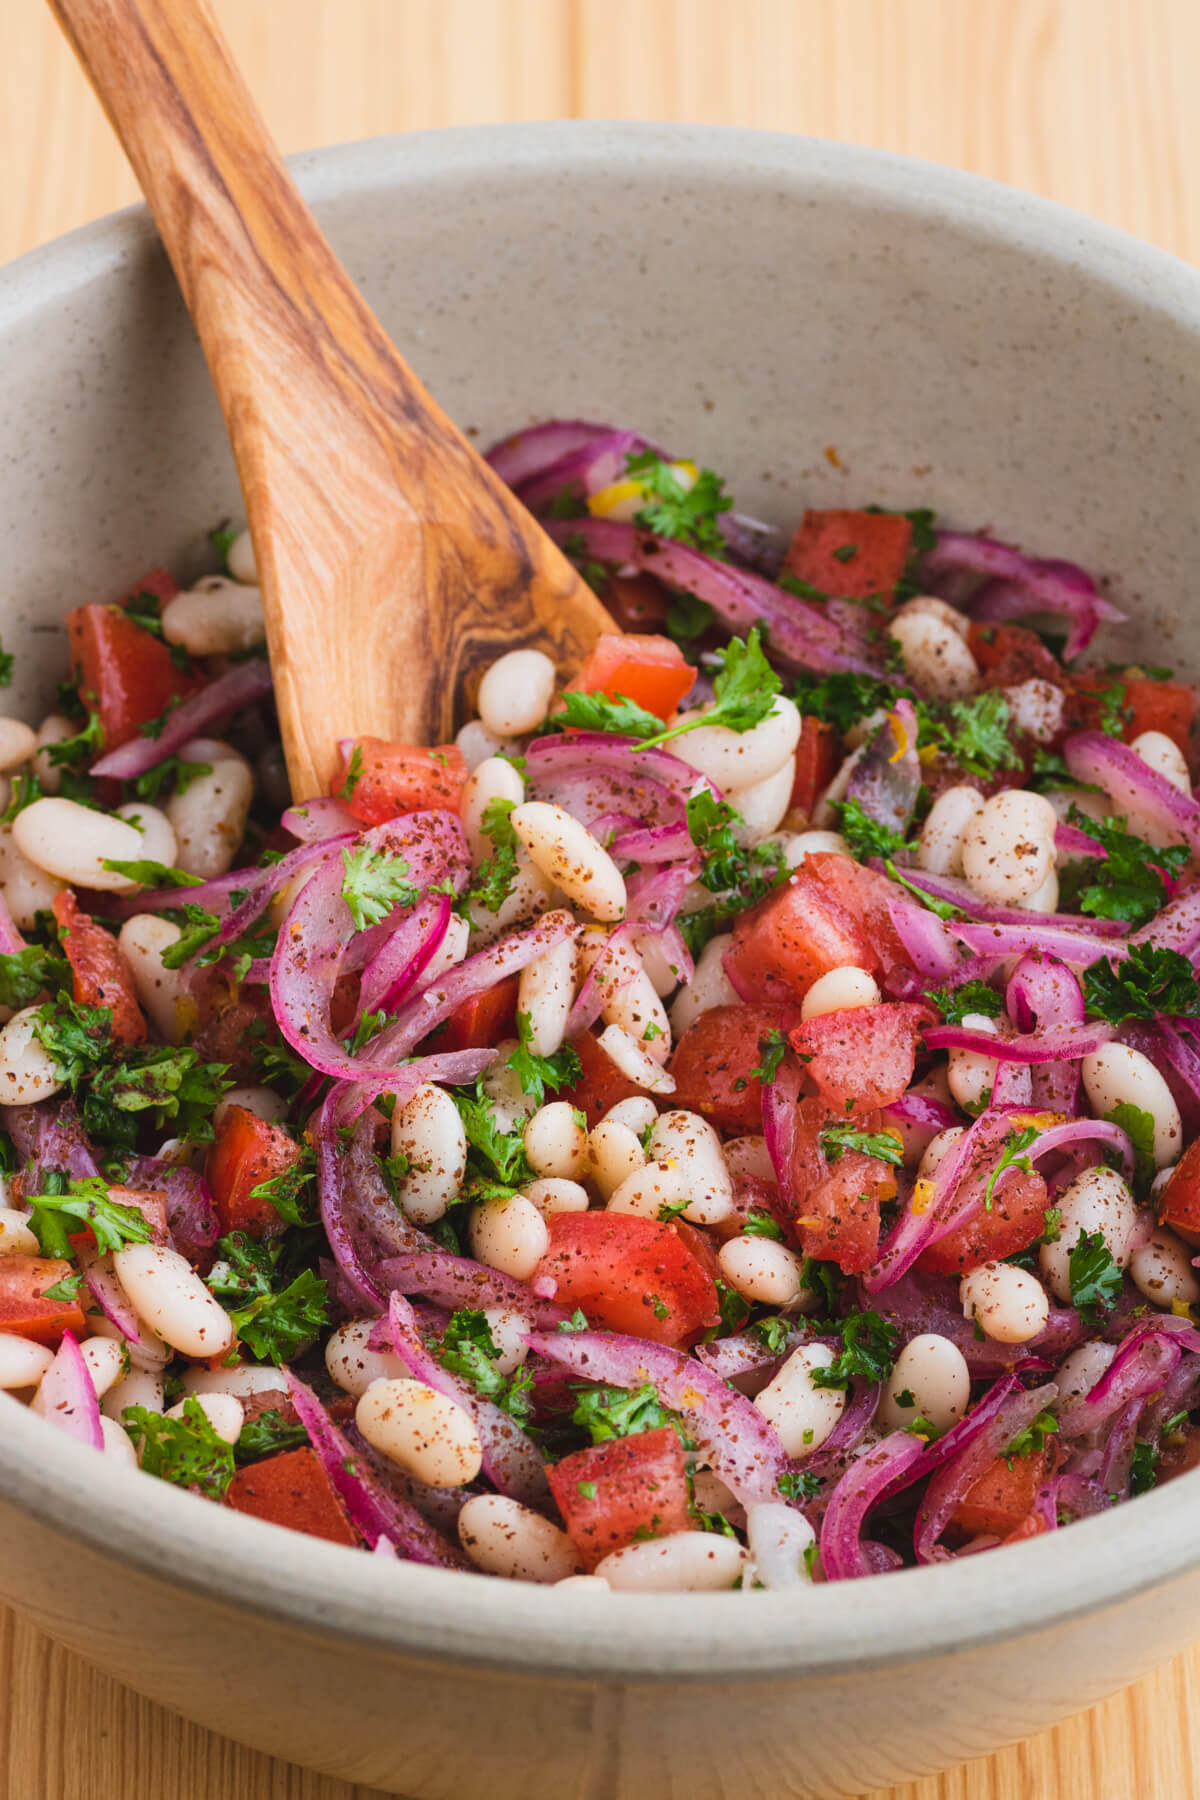 A wooden spoon holds a serving of colourful white bean salad with red onions, tomatoes, and green curly parsley.